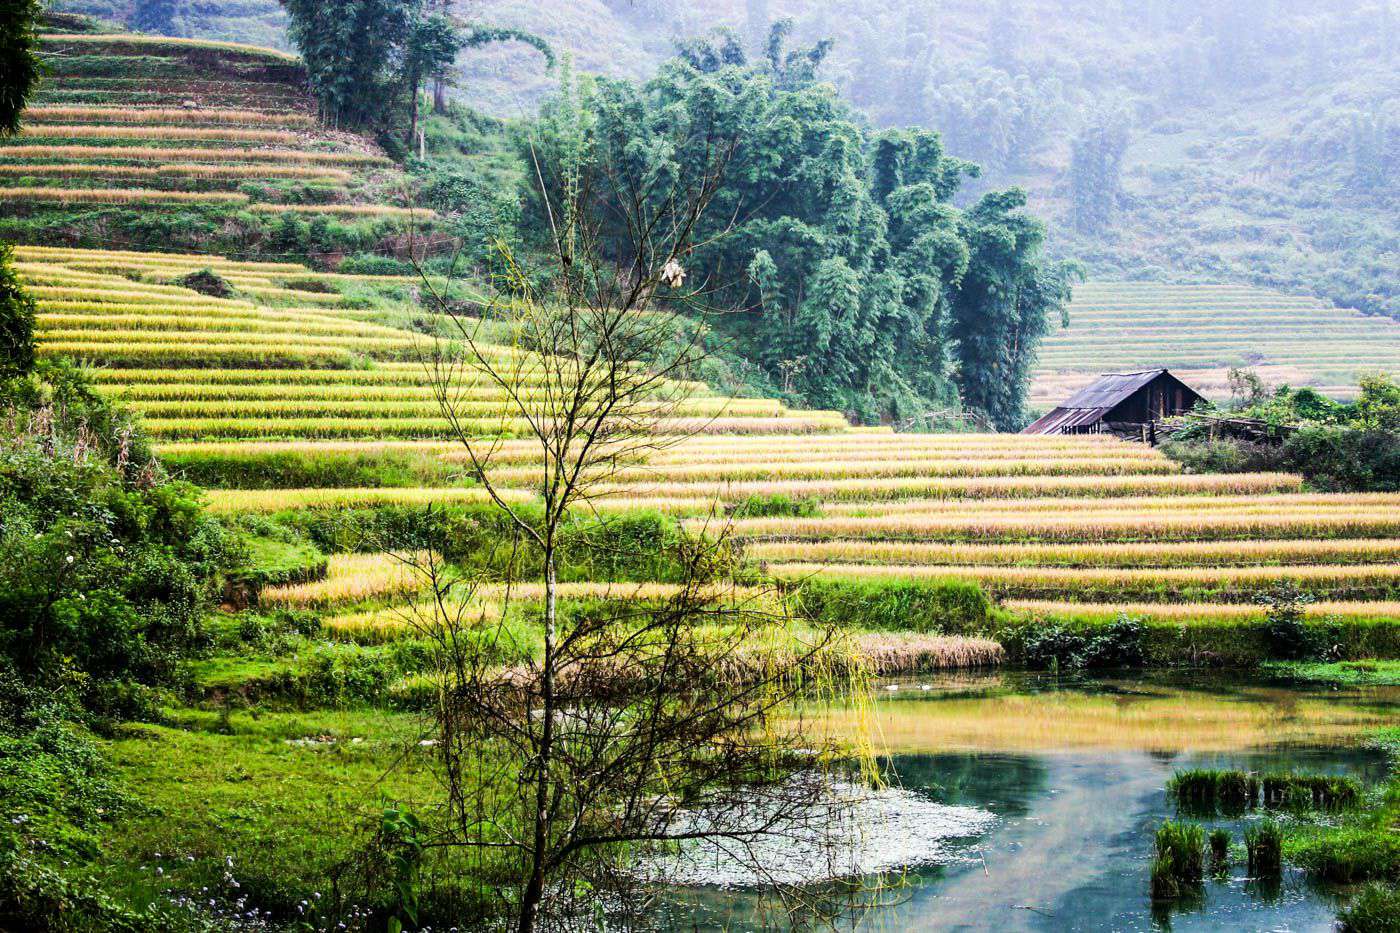 Sapa Travel Cost - Average Price of a Vacation to Sapa: Food & Meal